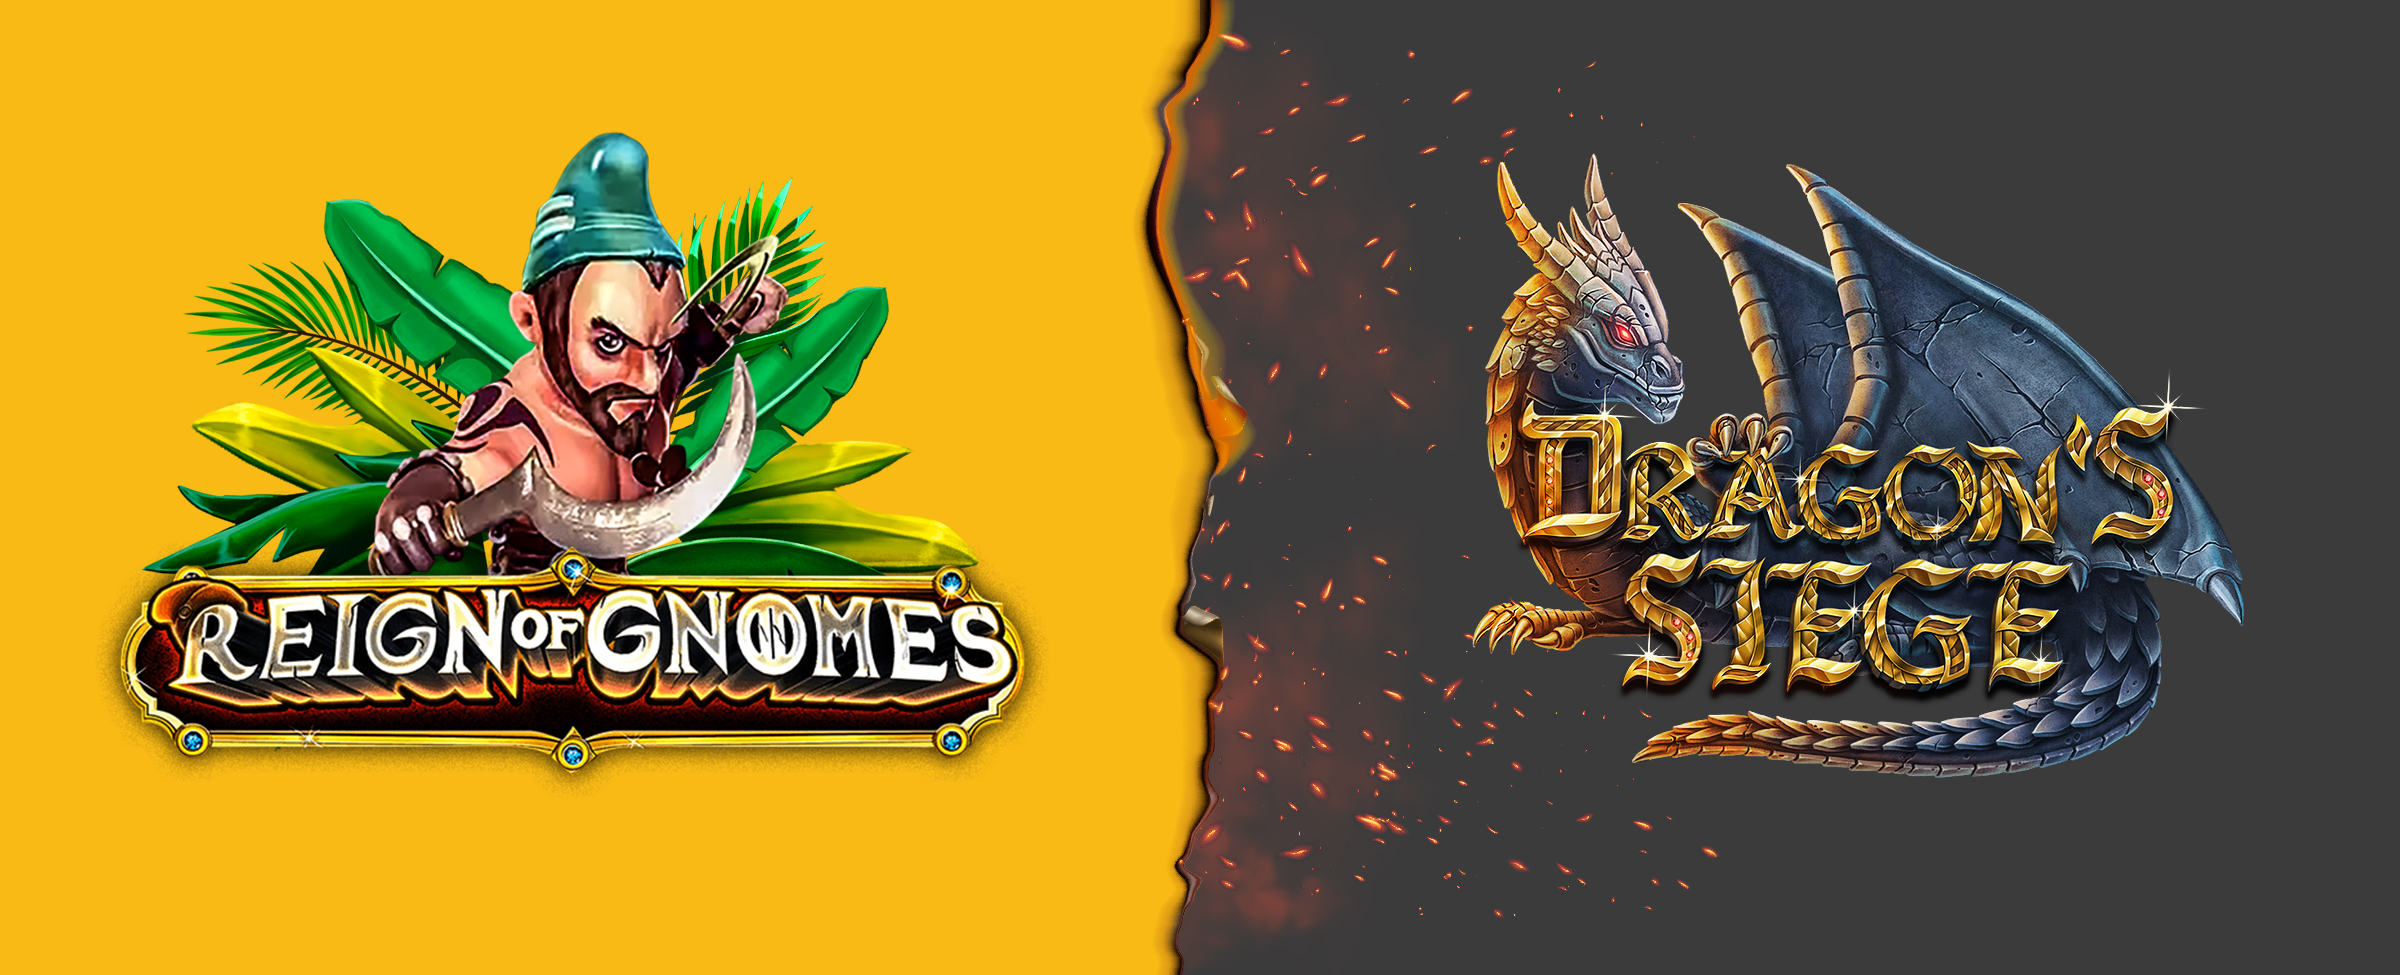 For fantasy buffs, you’ll find your majestic calling in both Dragon’s Siege and Reign of Gnomes when you give them a shot. Time to nerd out – you deserve it.